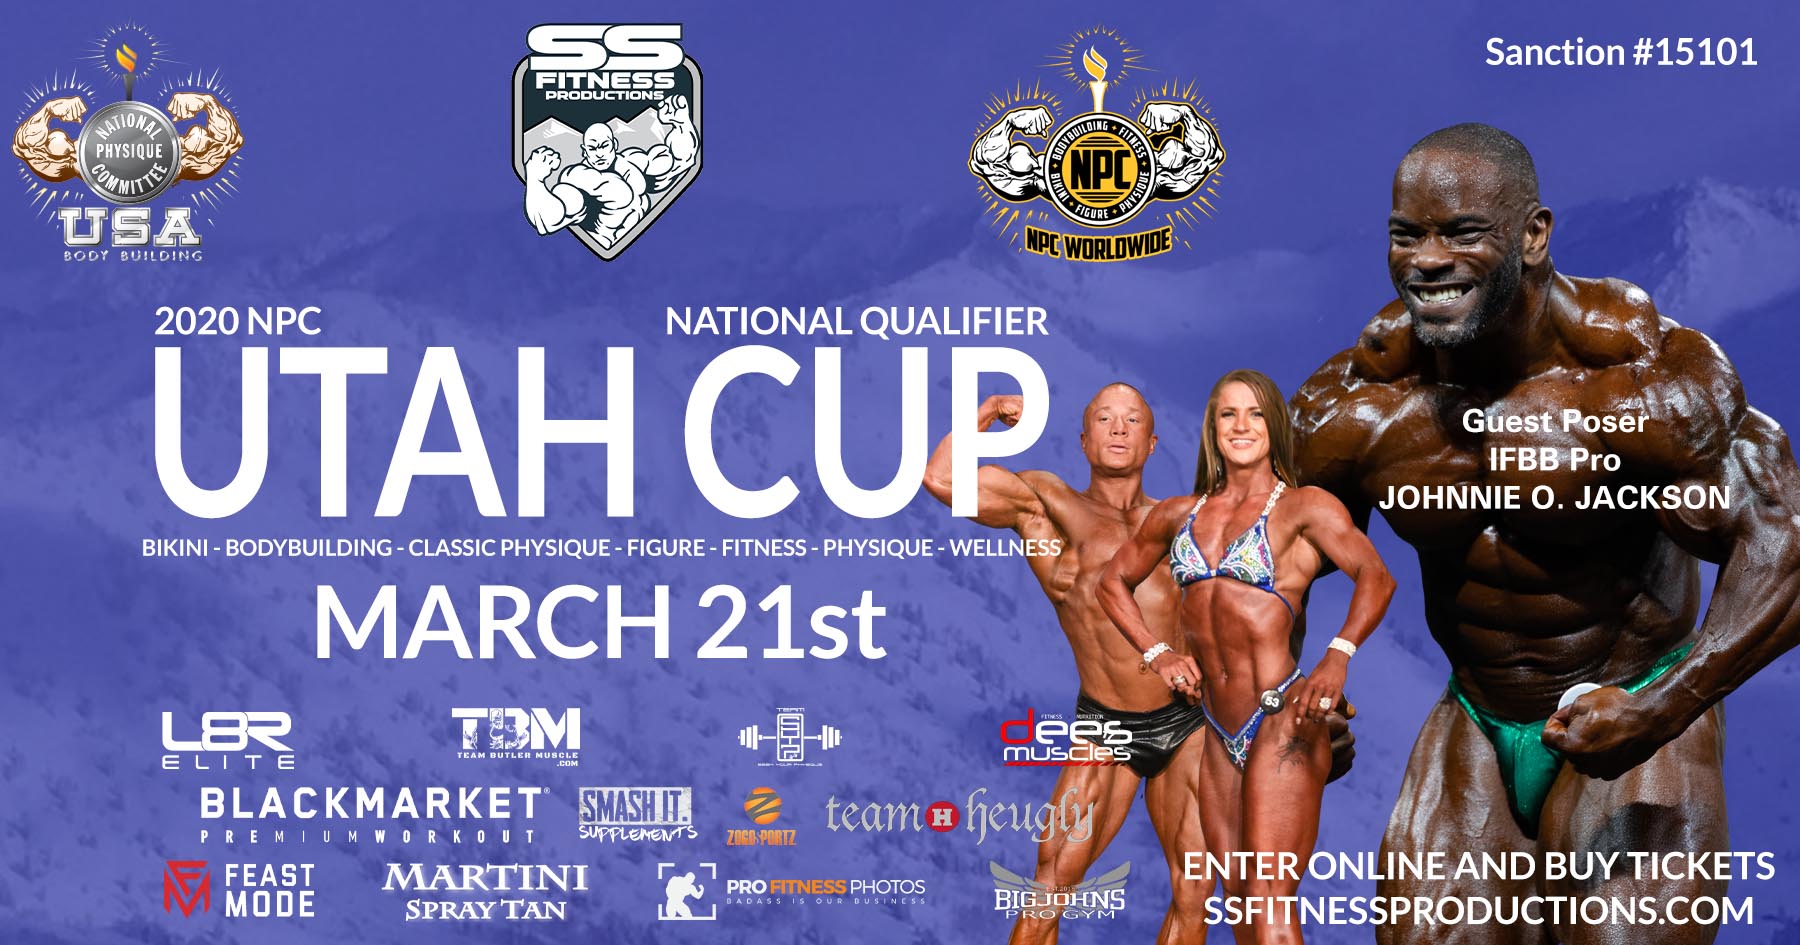 2020 NPC Utah Cup - SS Fitness Productions - Bodybuilding, Fitness